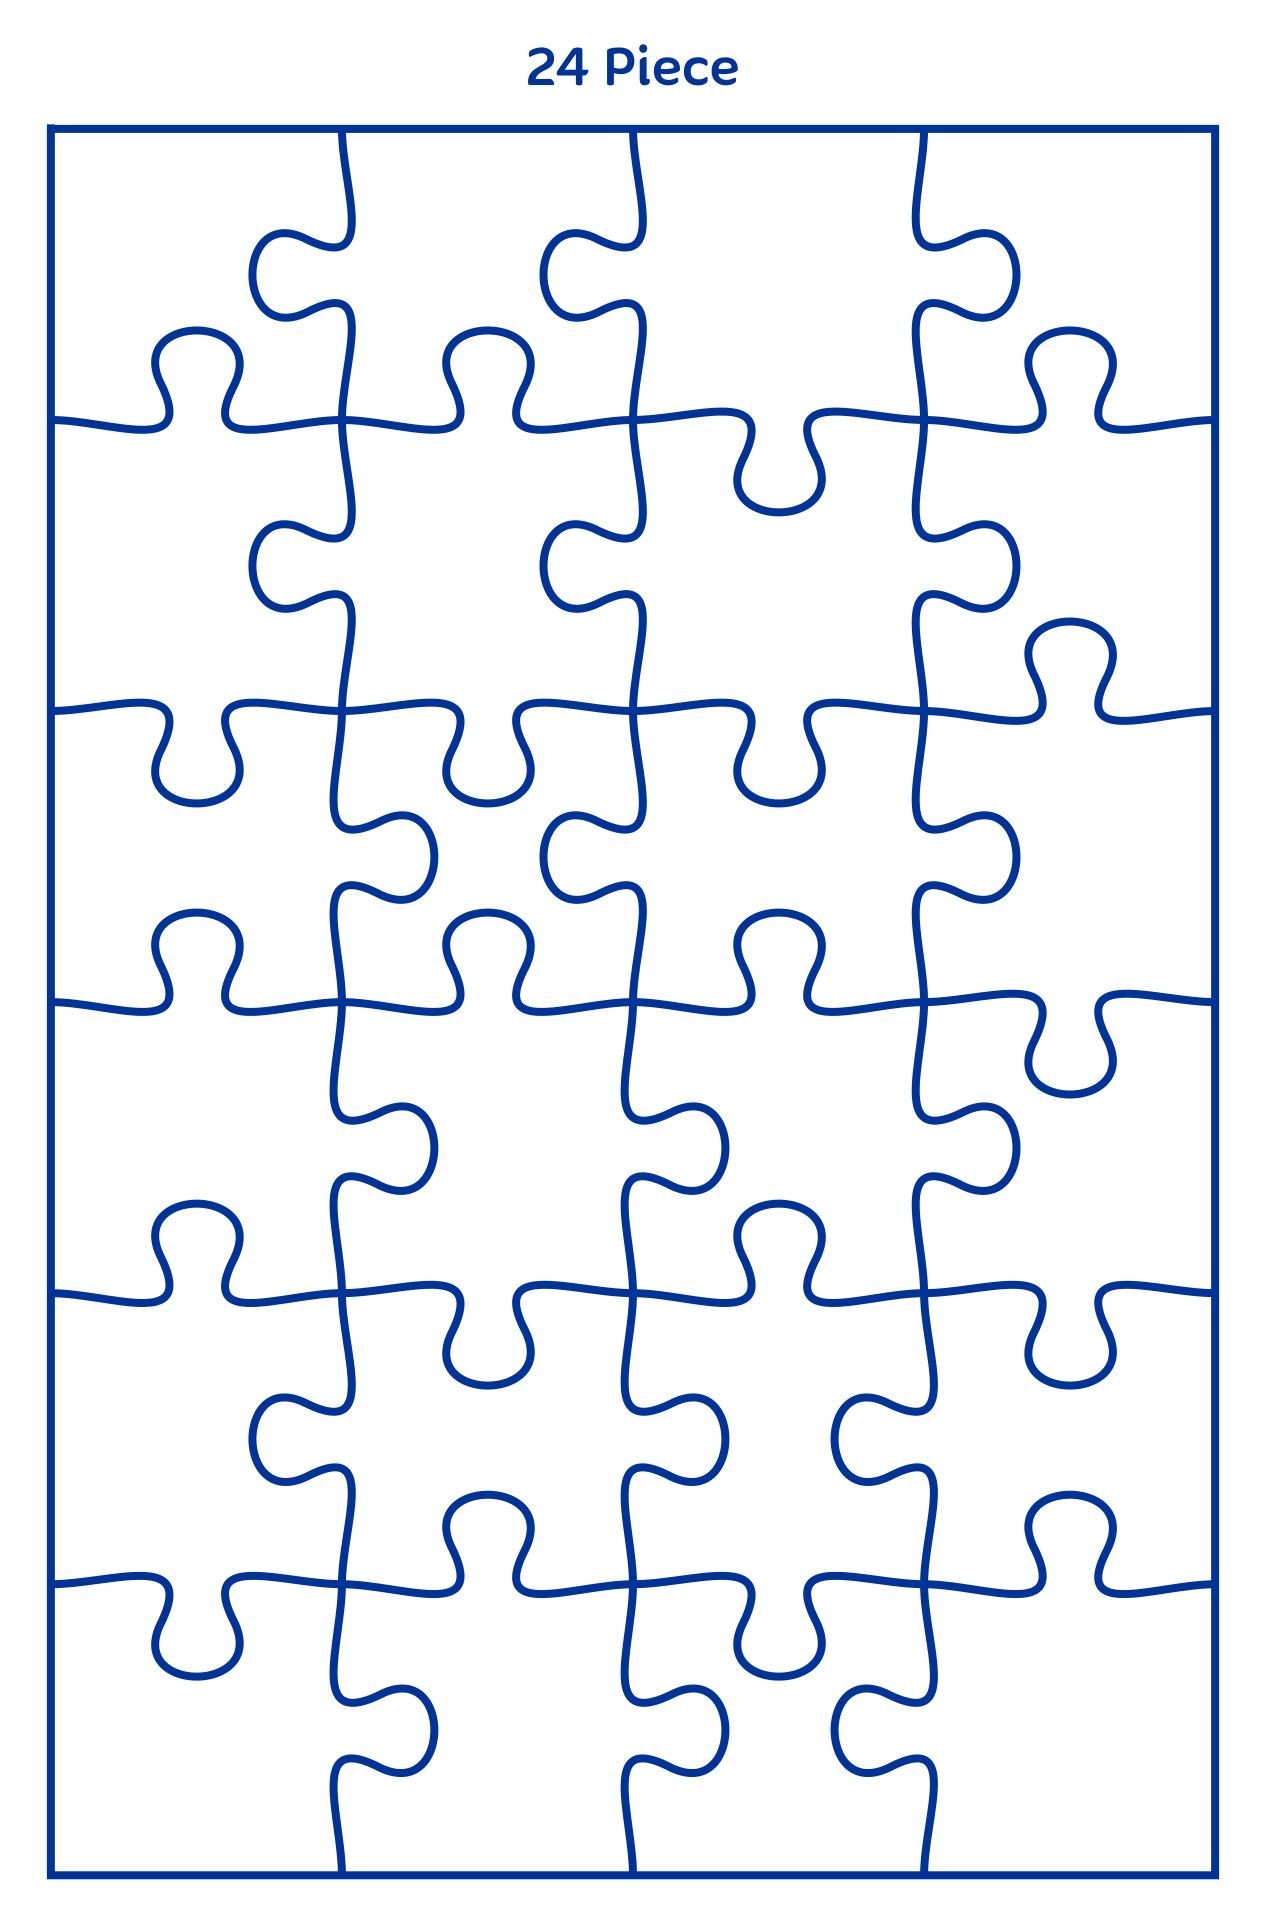 Pin On Craft Ideas - Free Printable Blank Puzzle Pieces